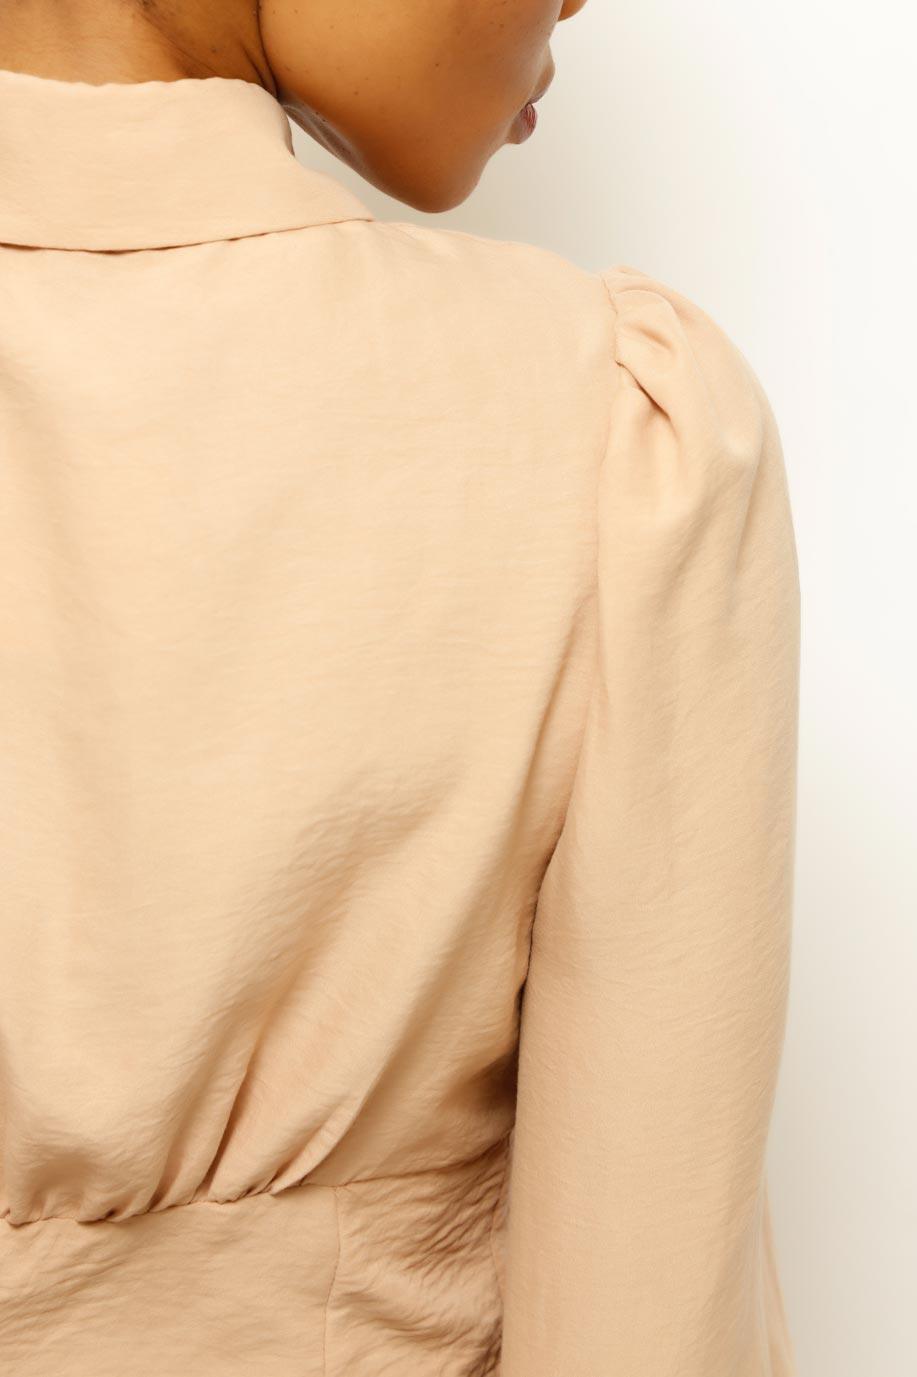 HELEYNA COLLARED FASHION TOP, BLOUSE, CORADO, be unique, blouse, casual, collared, corado fashion, coradomoda, day out, FASHION, label, lifestyle, light brown, longsleeve, made in turkey, ootd, shirt, statement, street style, style, top, vibe, women, coradomoda, coradomoda.com